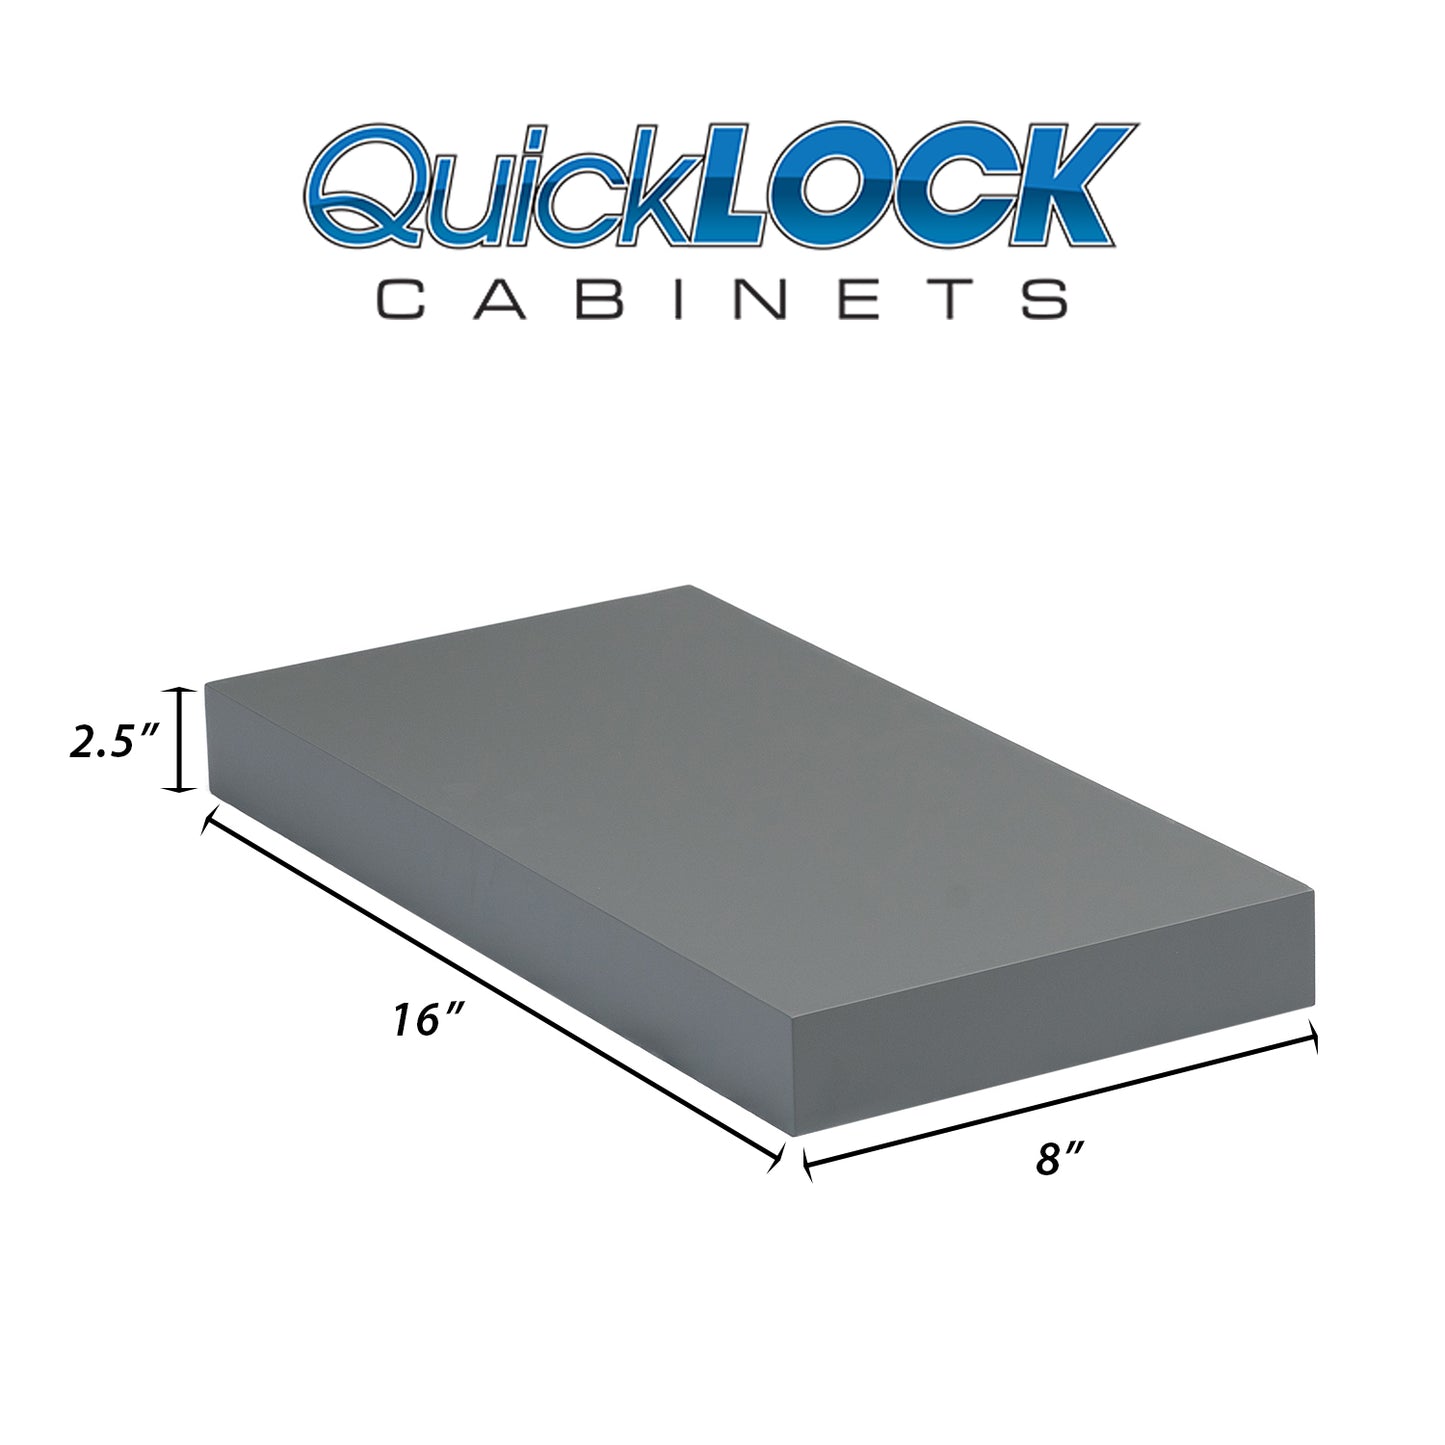 Quicklock Cabinets Floating Shelves | 2.5" Thick | Magnetic Gray, 8" D x 16" W x 2.5" H | American Made | Hardwood Bracket | Complete Shelf Unit